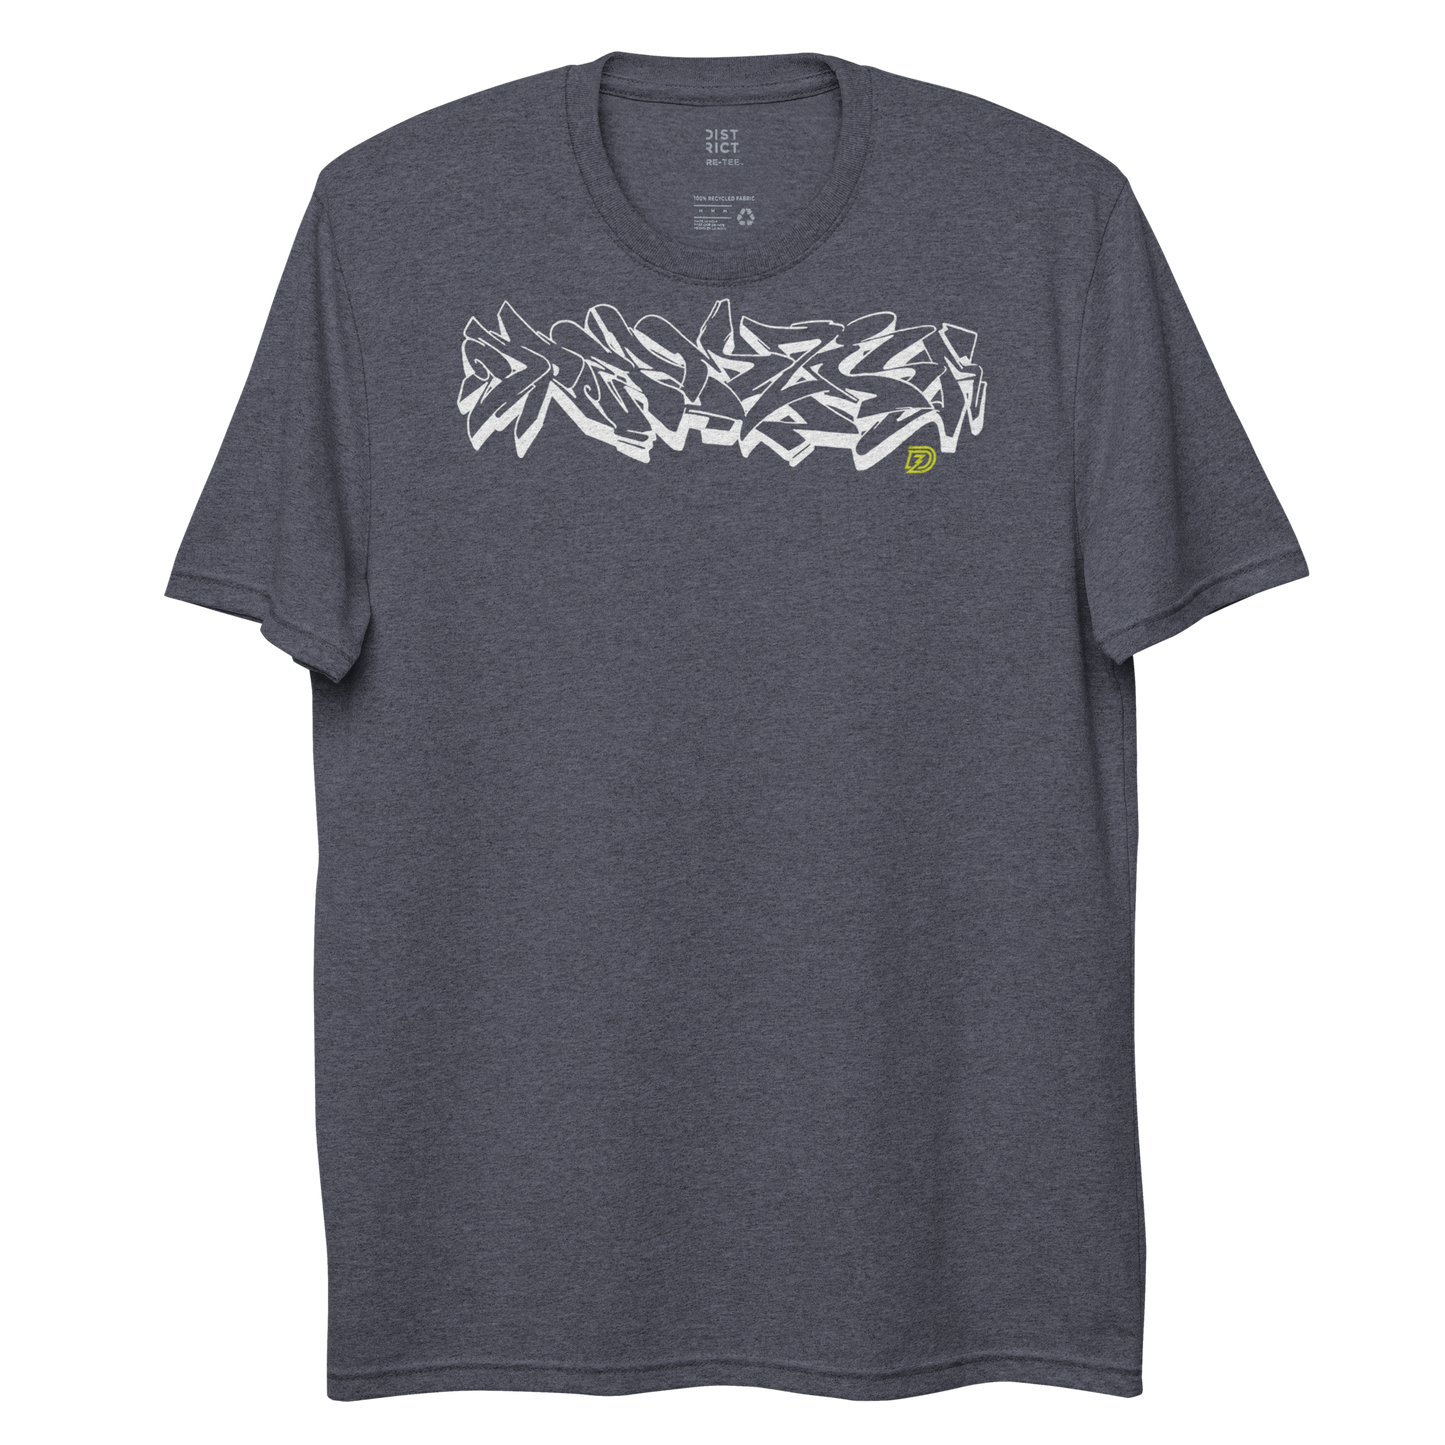 Graffiti Wildstyle 2 by Sanitor Unisex Recycled Short Sleeve Tee in Heathered Navy